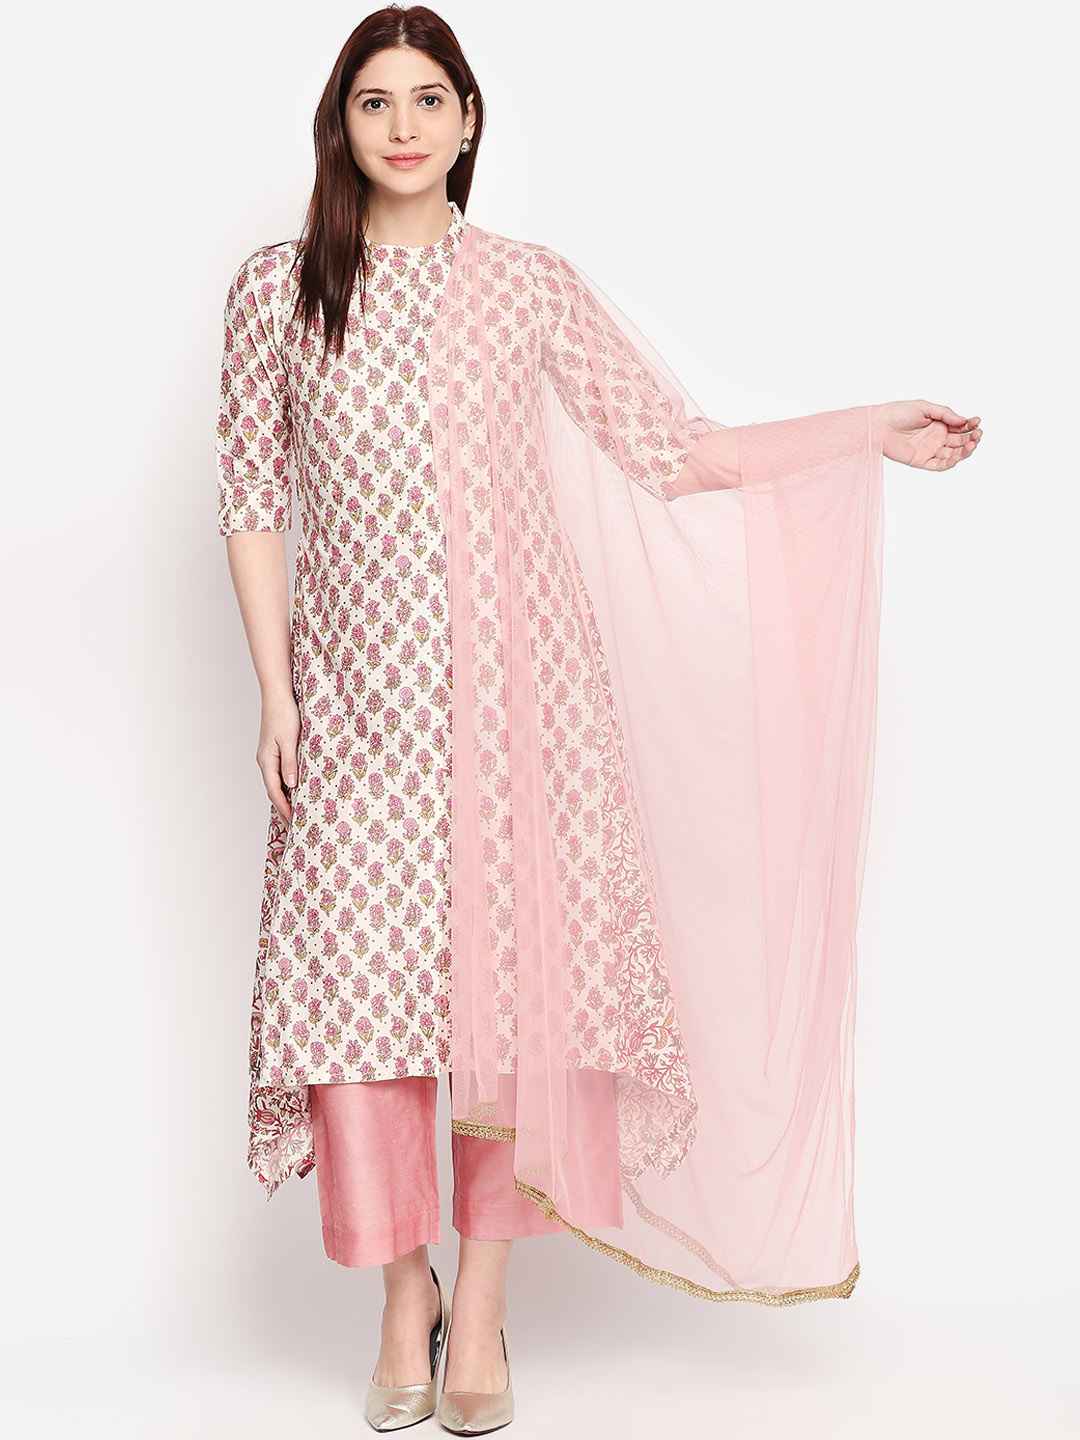 RANGMANCH-BY-PANTALOONS-Women-Off-White-and-Pink-Printed-Kurta-with-Trousers-and-Dupatta